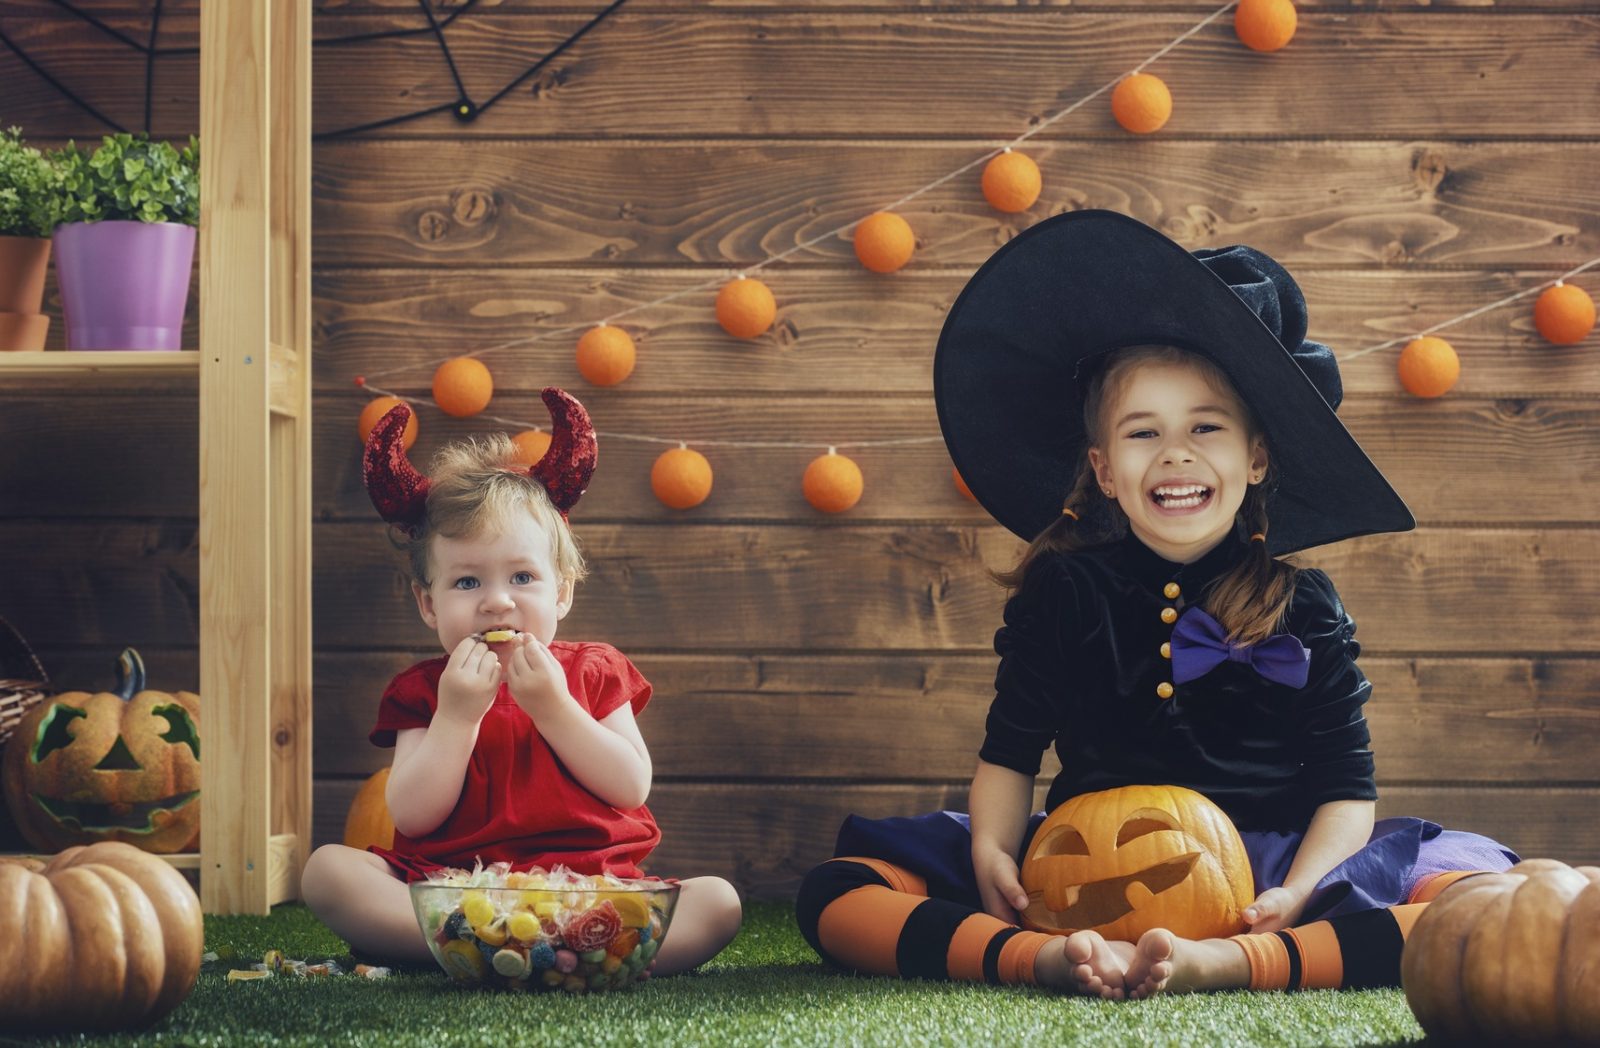 What Halloween Costume Should You Wear This Year? Halloween costumes